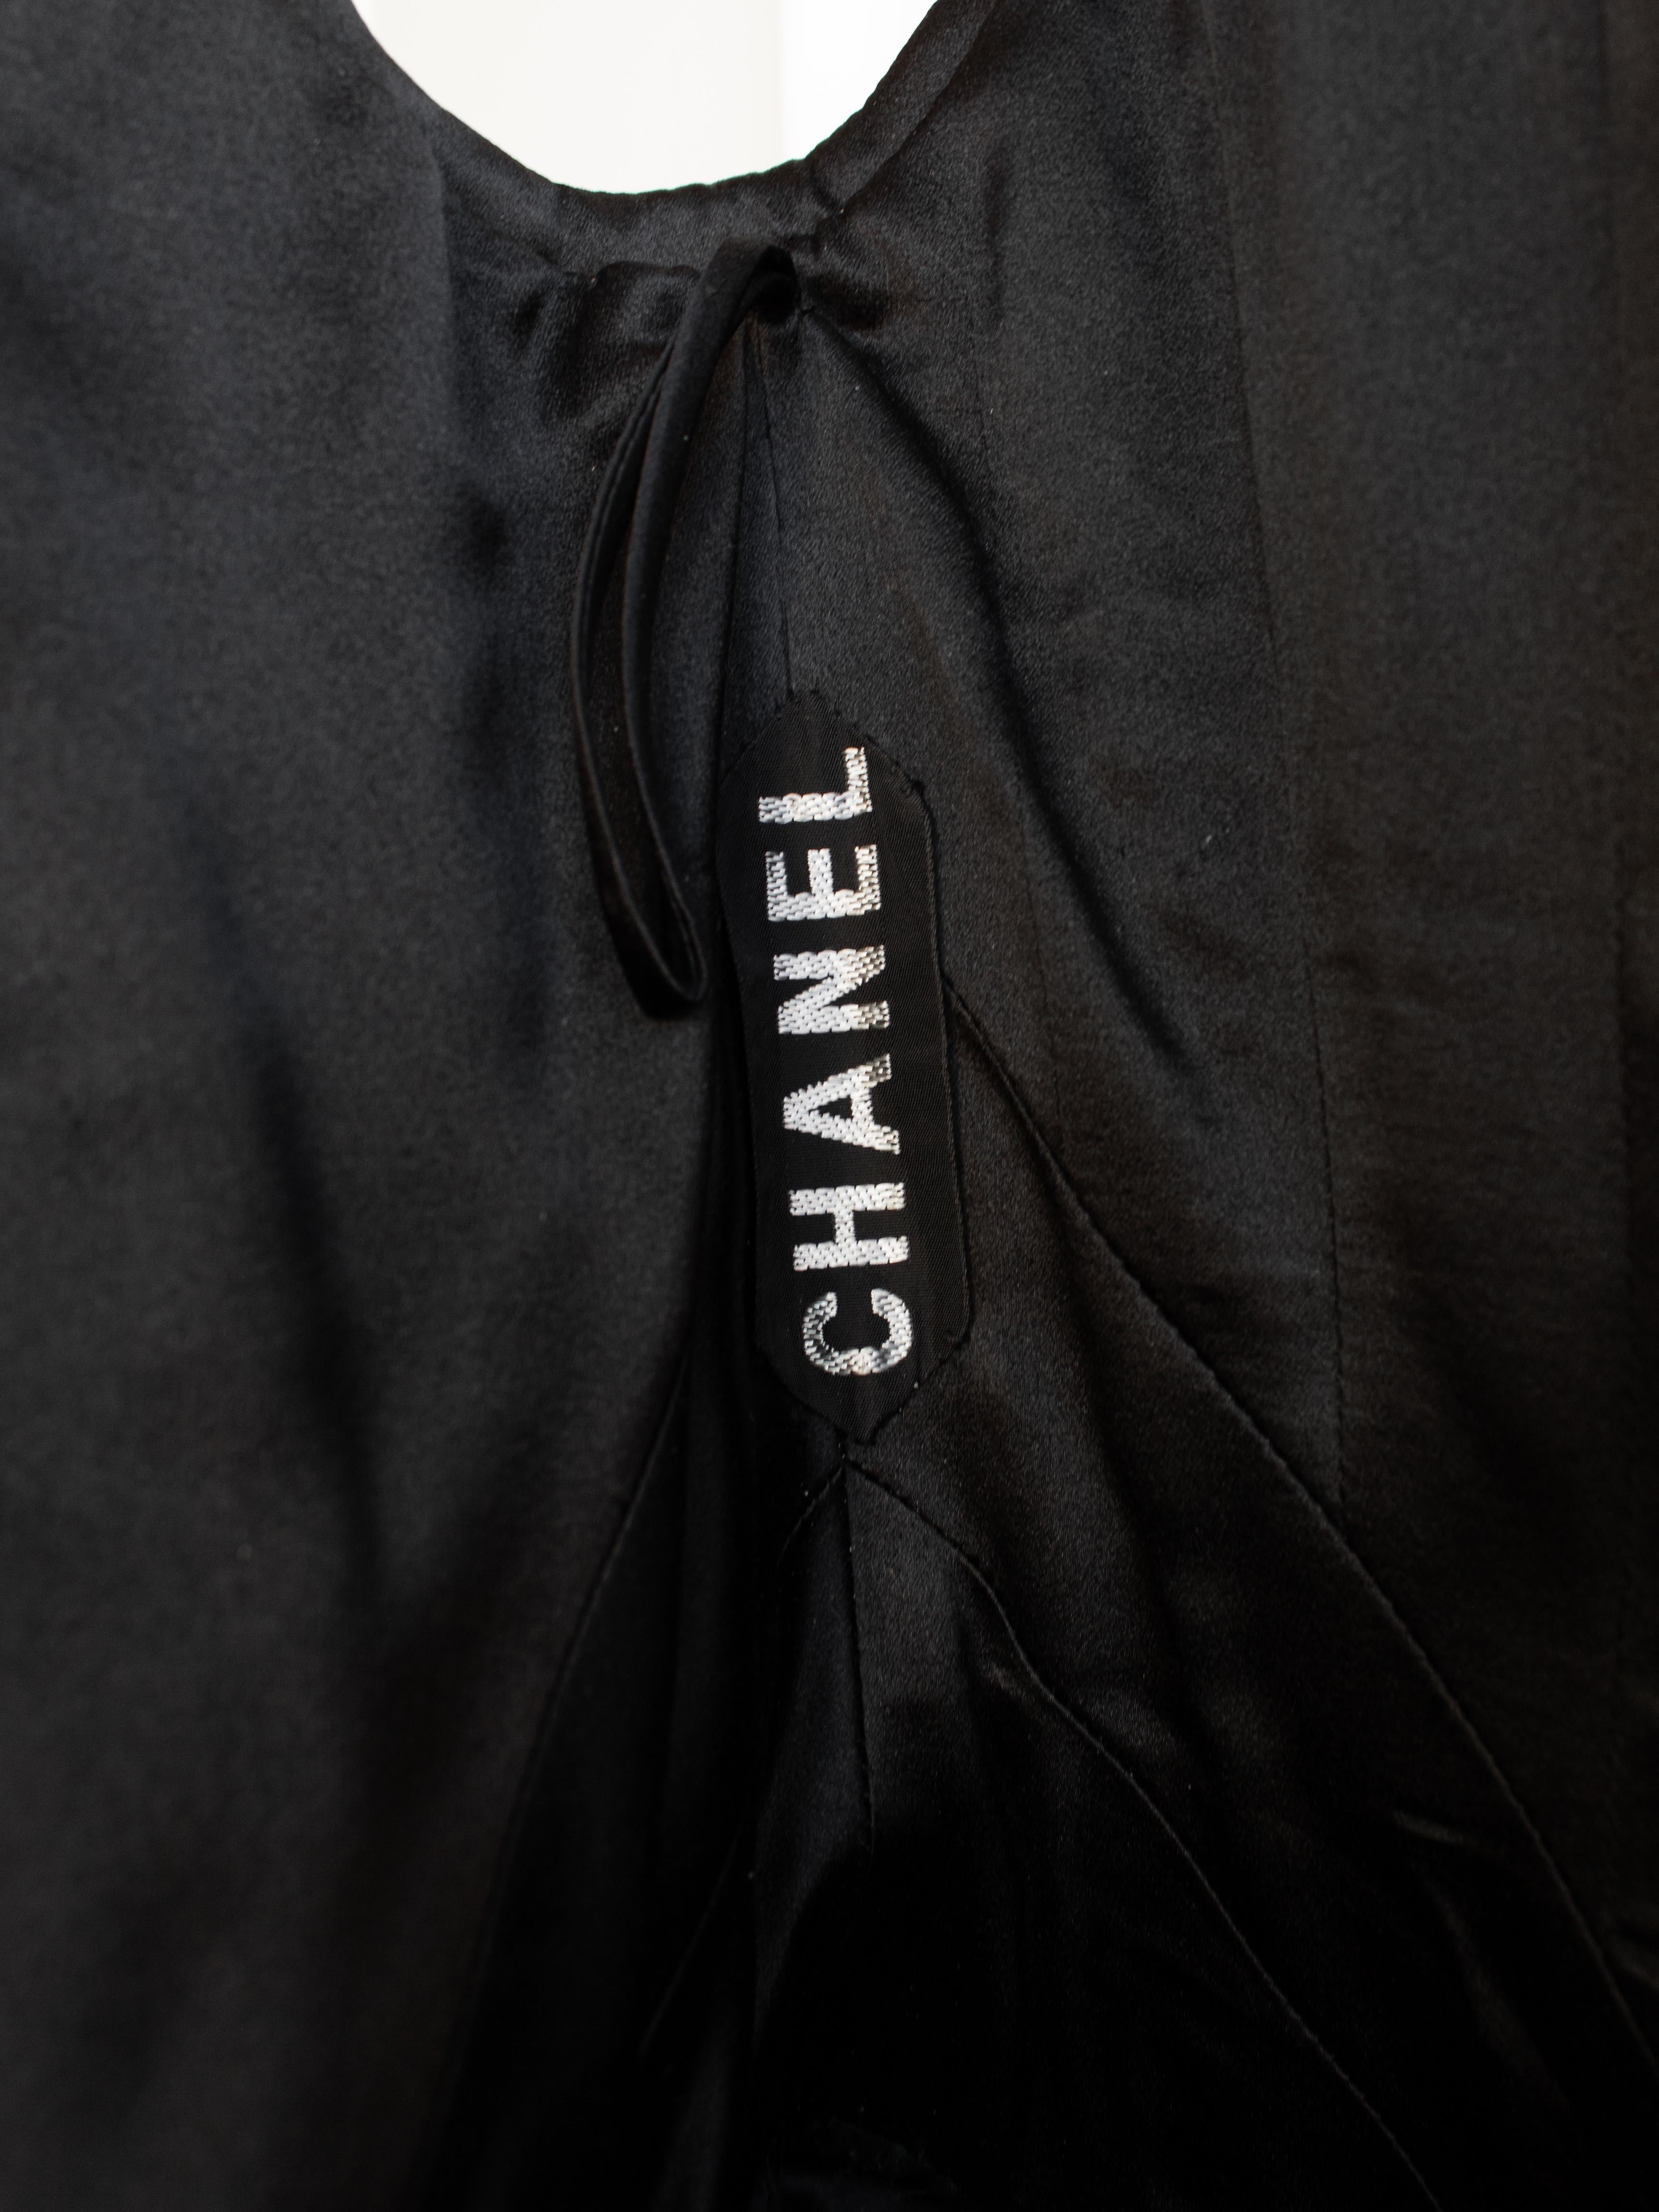 Chanel Vintage Haute Couture Fall/Winter 1992 Black Satin Corset Gown Dress For Sale 10